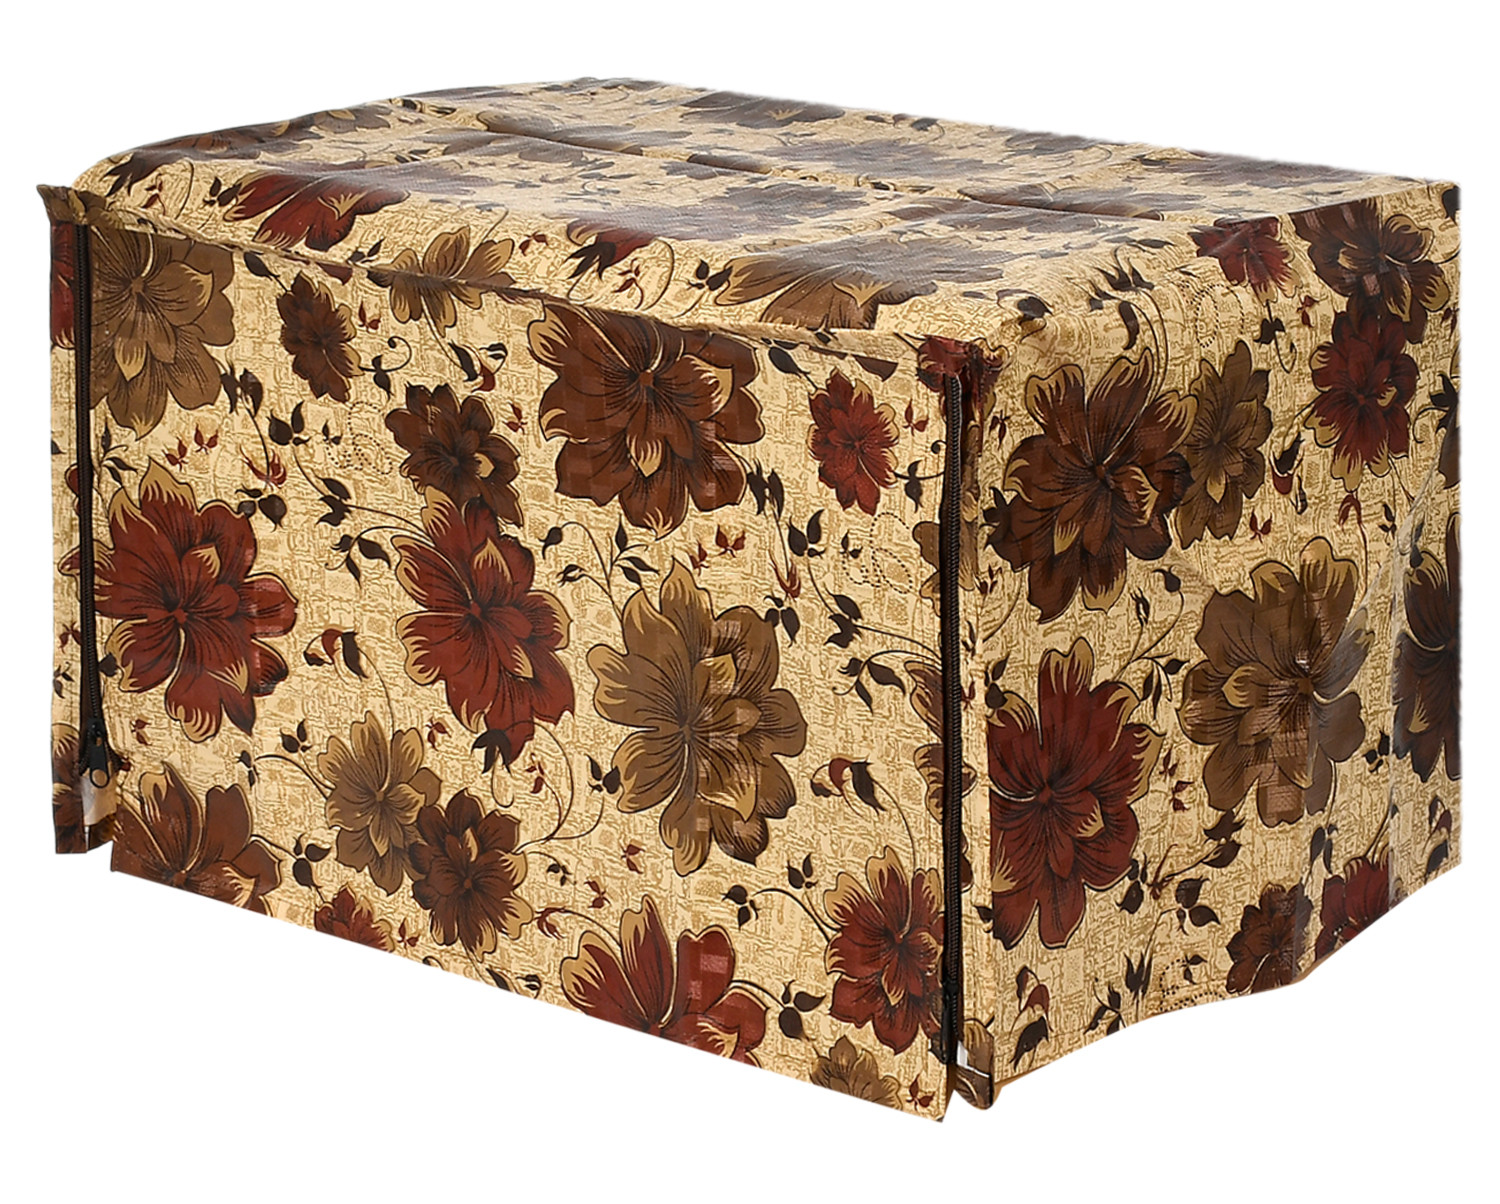 Kuber Industries PVC Flower Printed Microwave Oven Cover, Dustproof Machine Protector Cover,20 Ltr. (Brown)